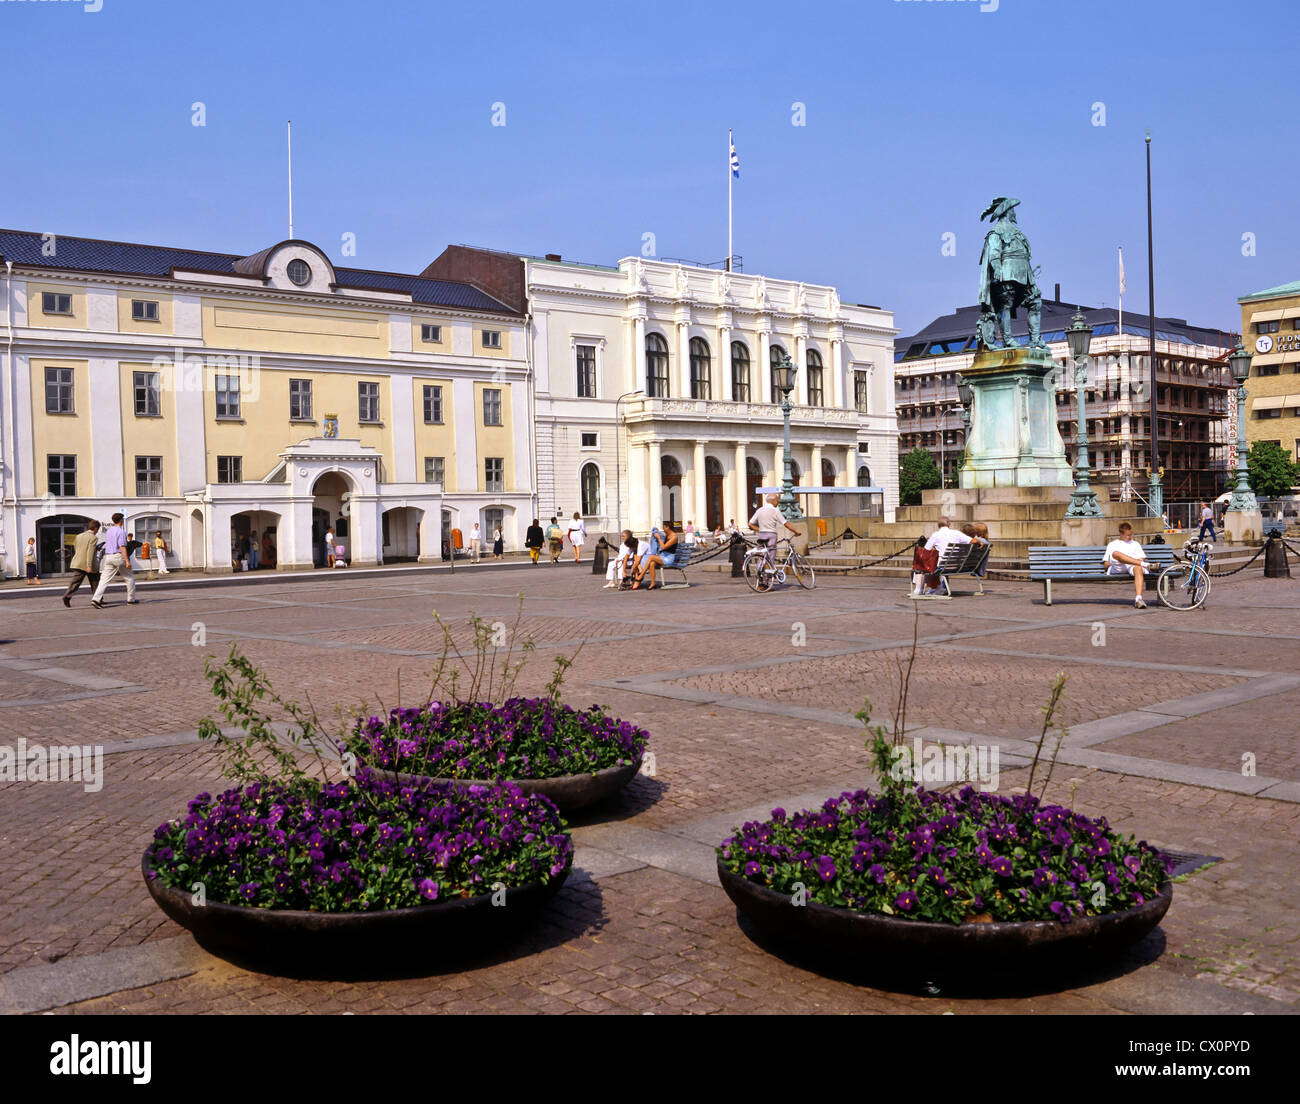 8277. Town Hall & Town Square, Goteborg, Sweden, Europe Stock Photo